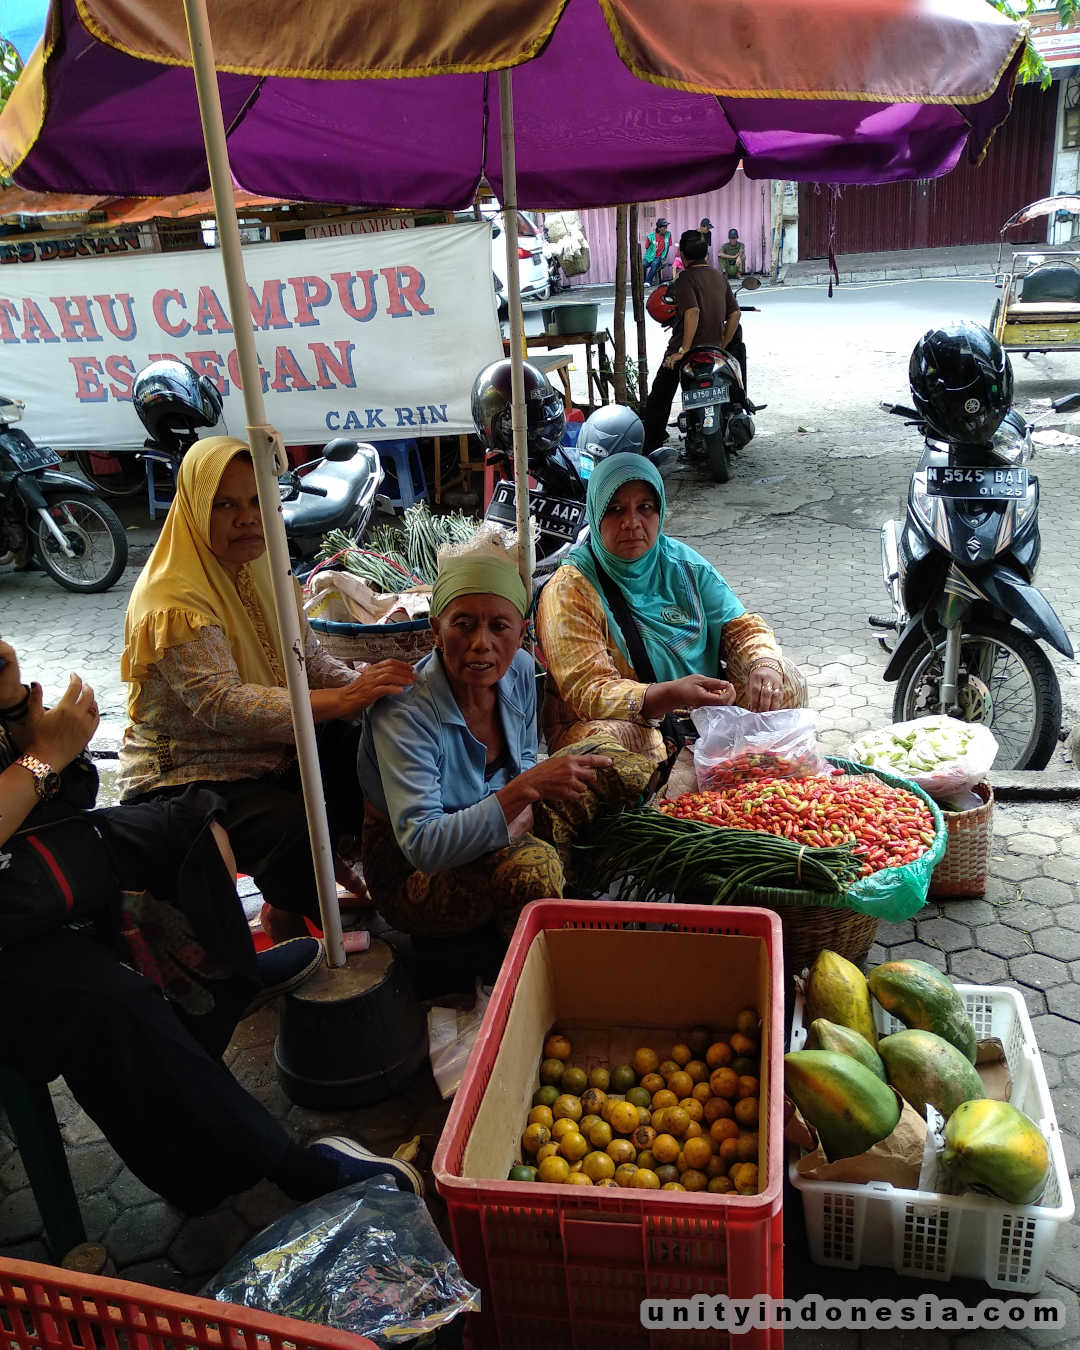 Women selling fruit at a traditional market.